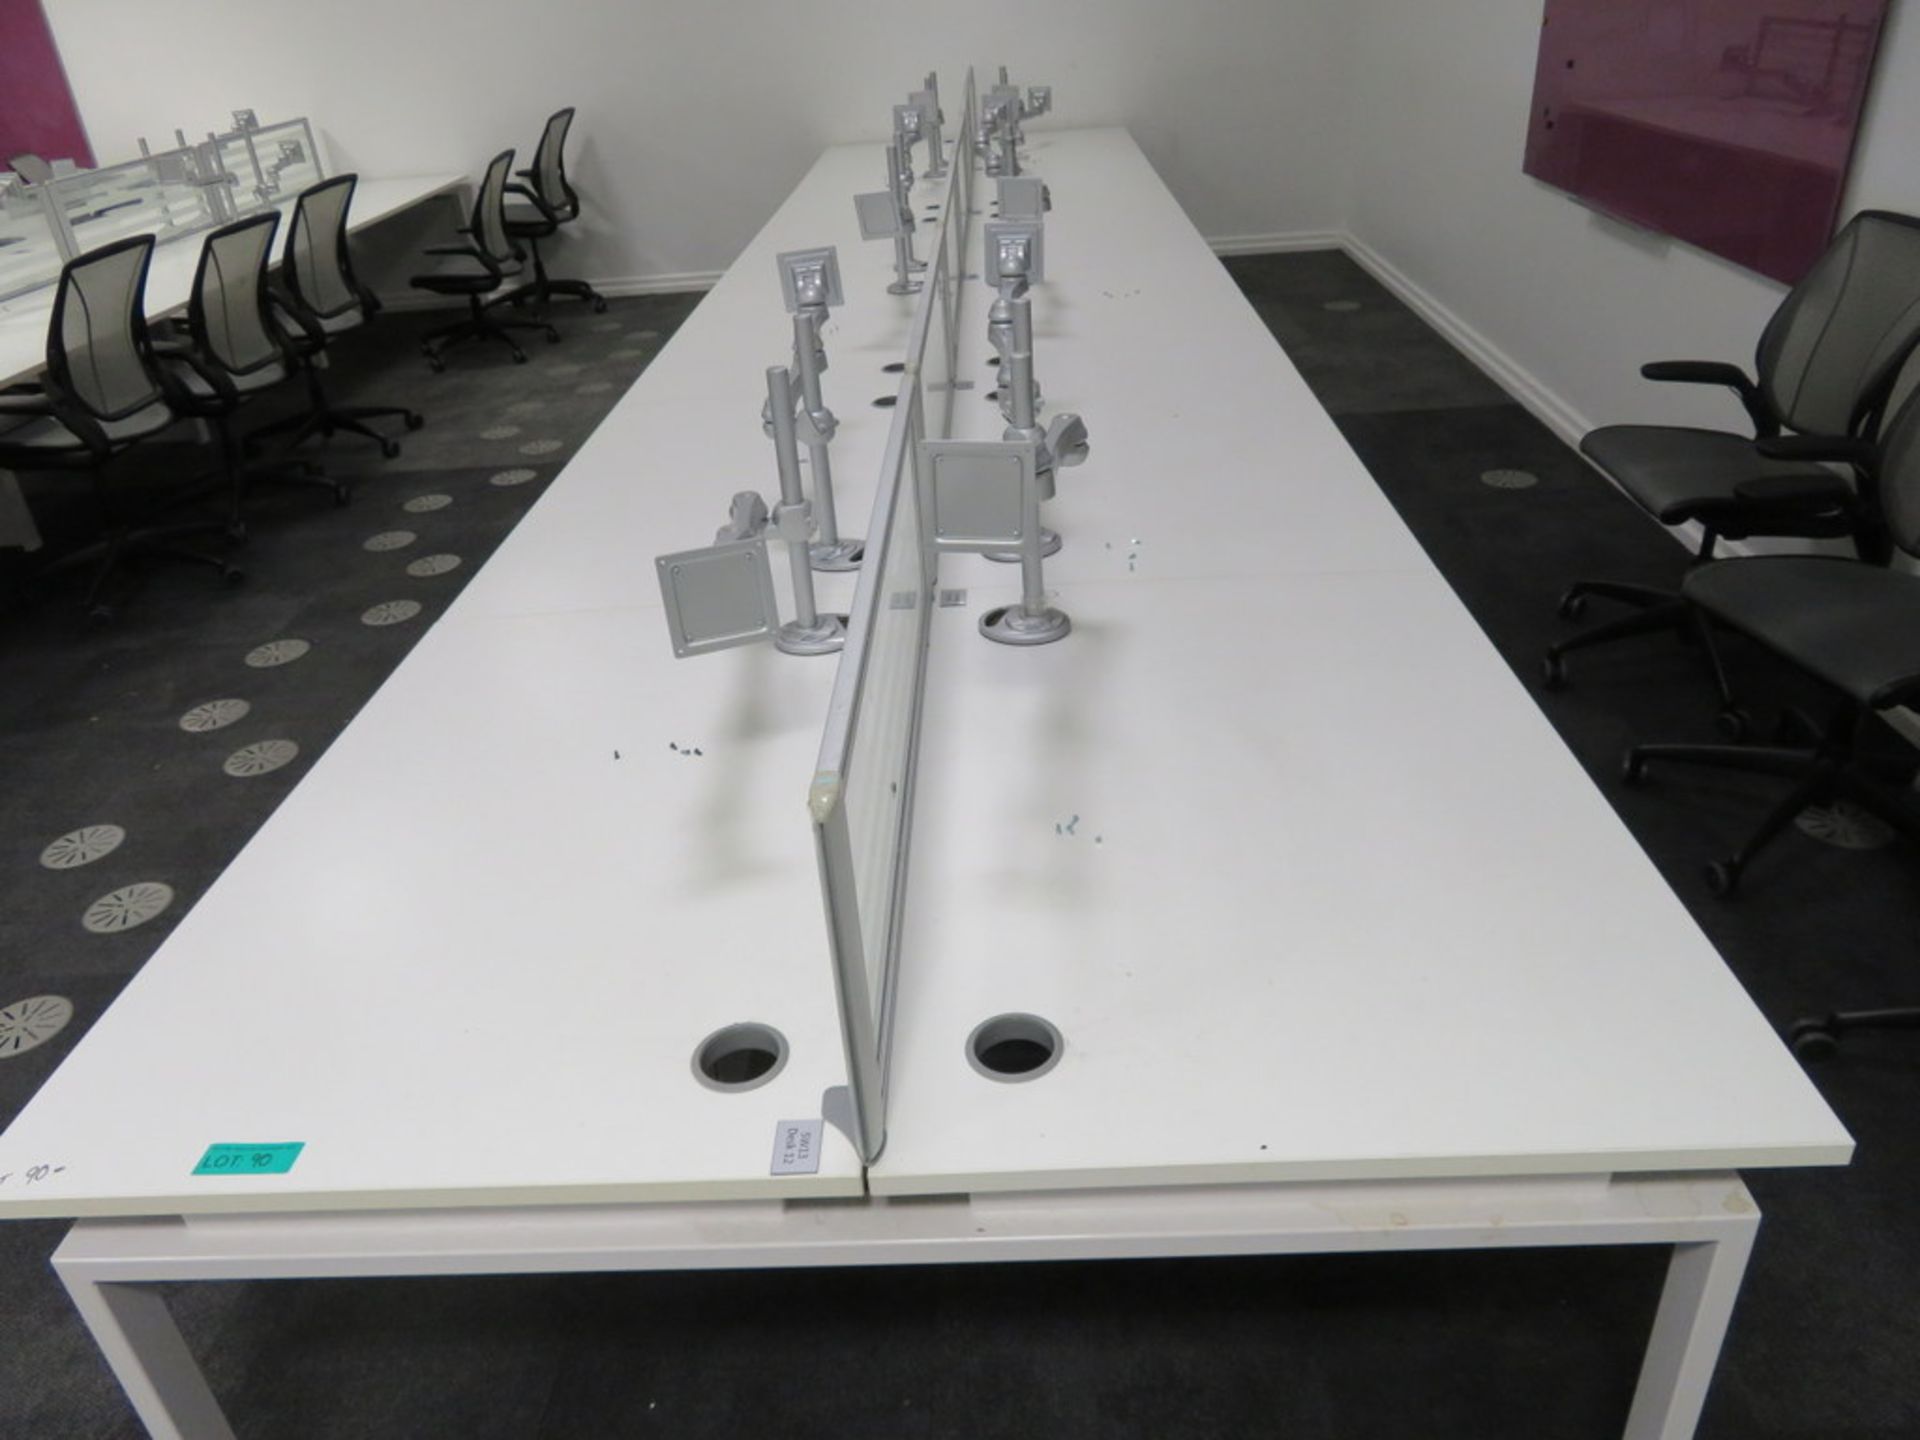 12 Person Desk Arrangement With Dividers & Monitor Arms. - Image 2 of 3